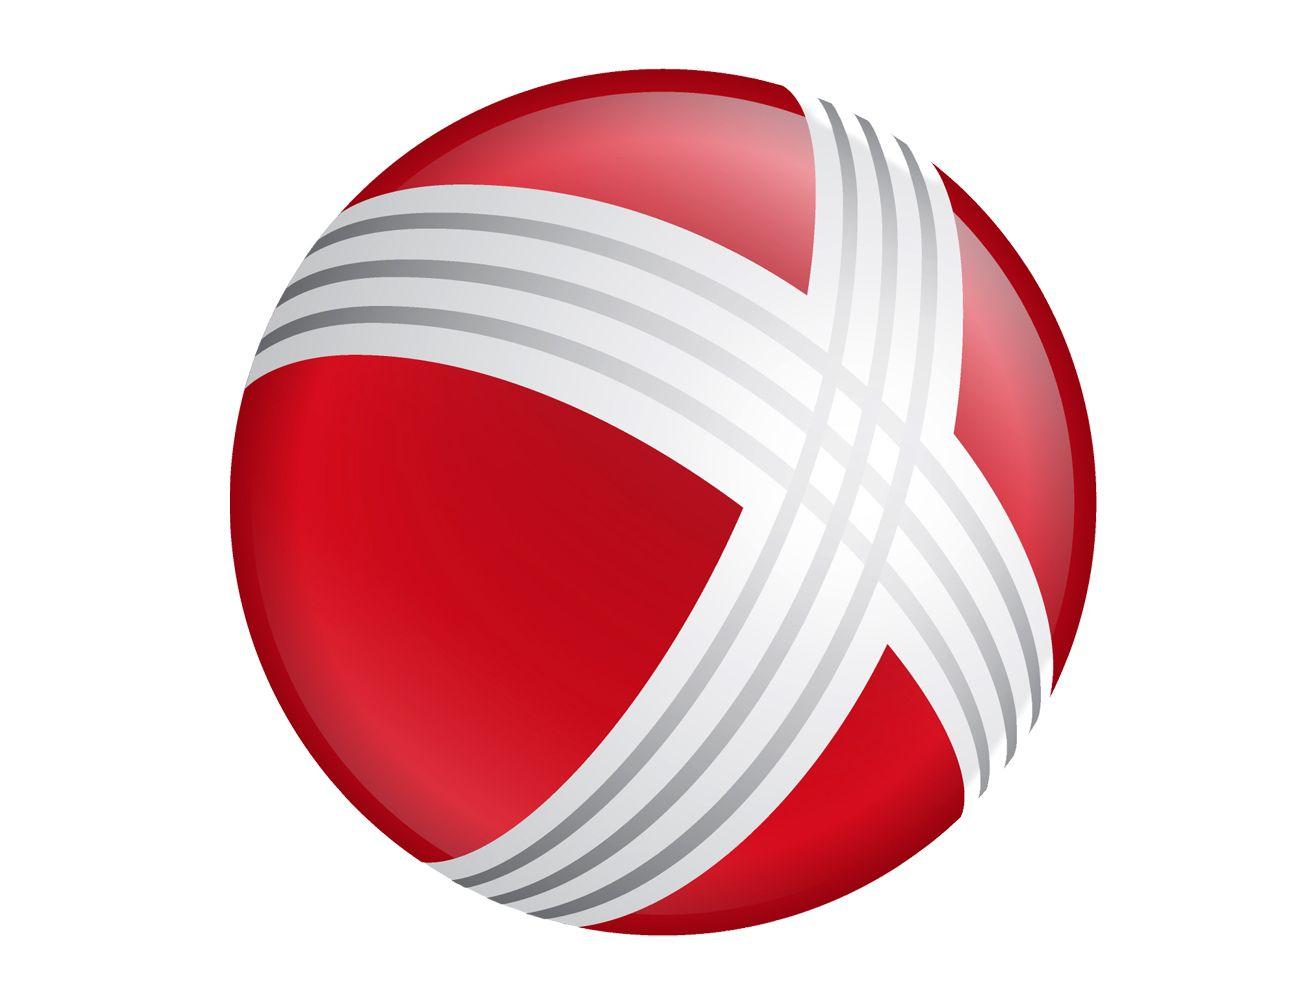 White with Red Ball Logo - Xerox Logo, Xerox Symbol, Meaning, History and Evolution